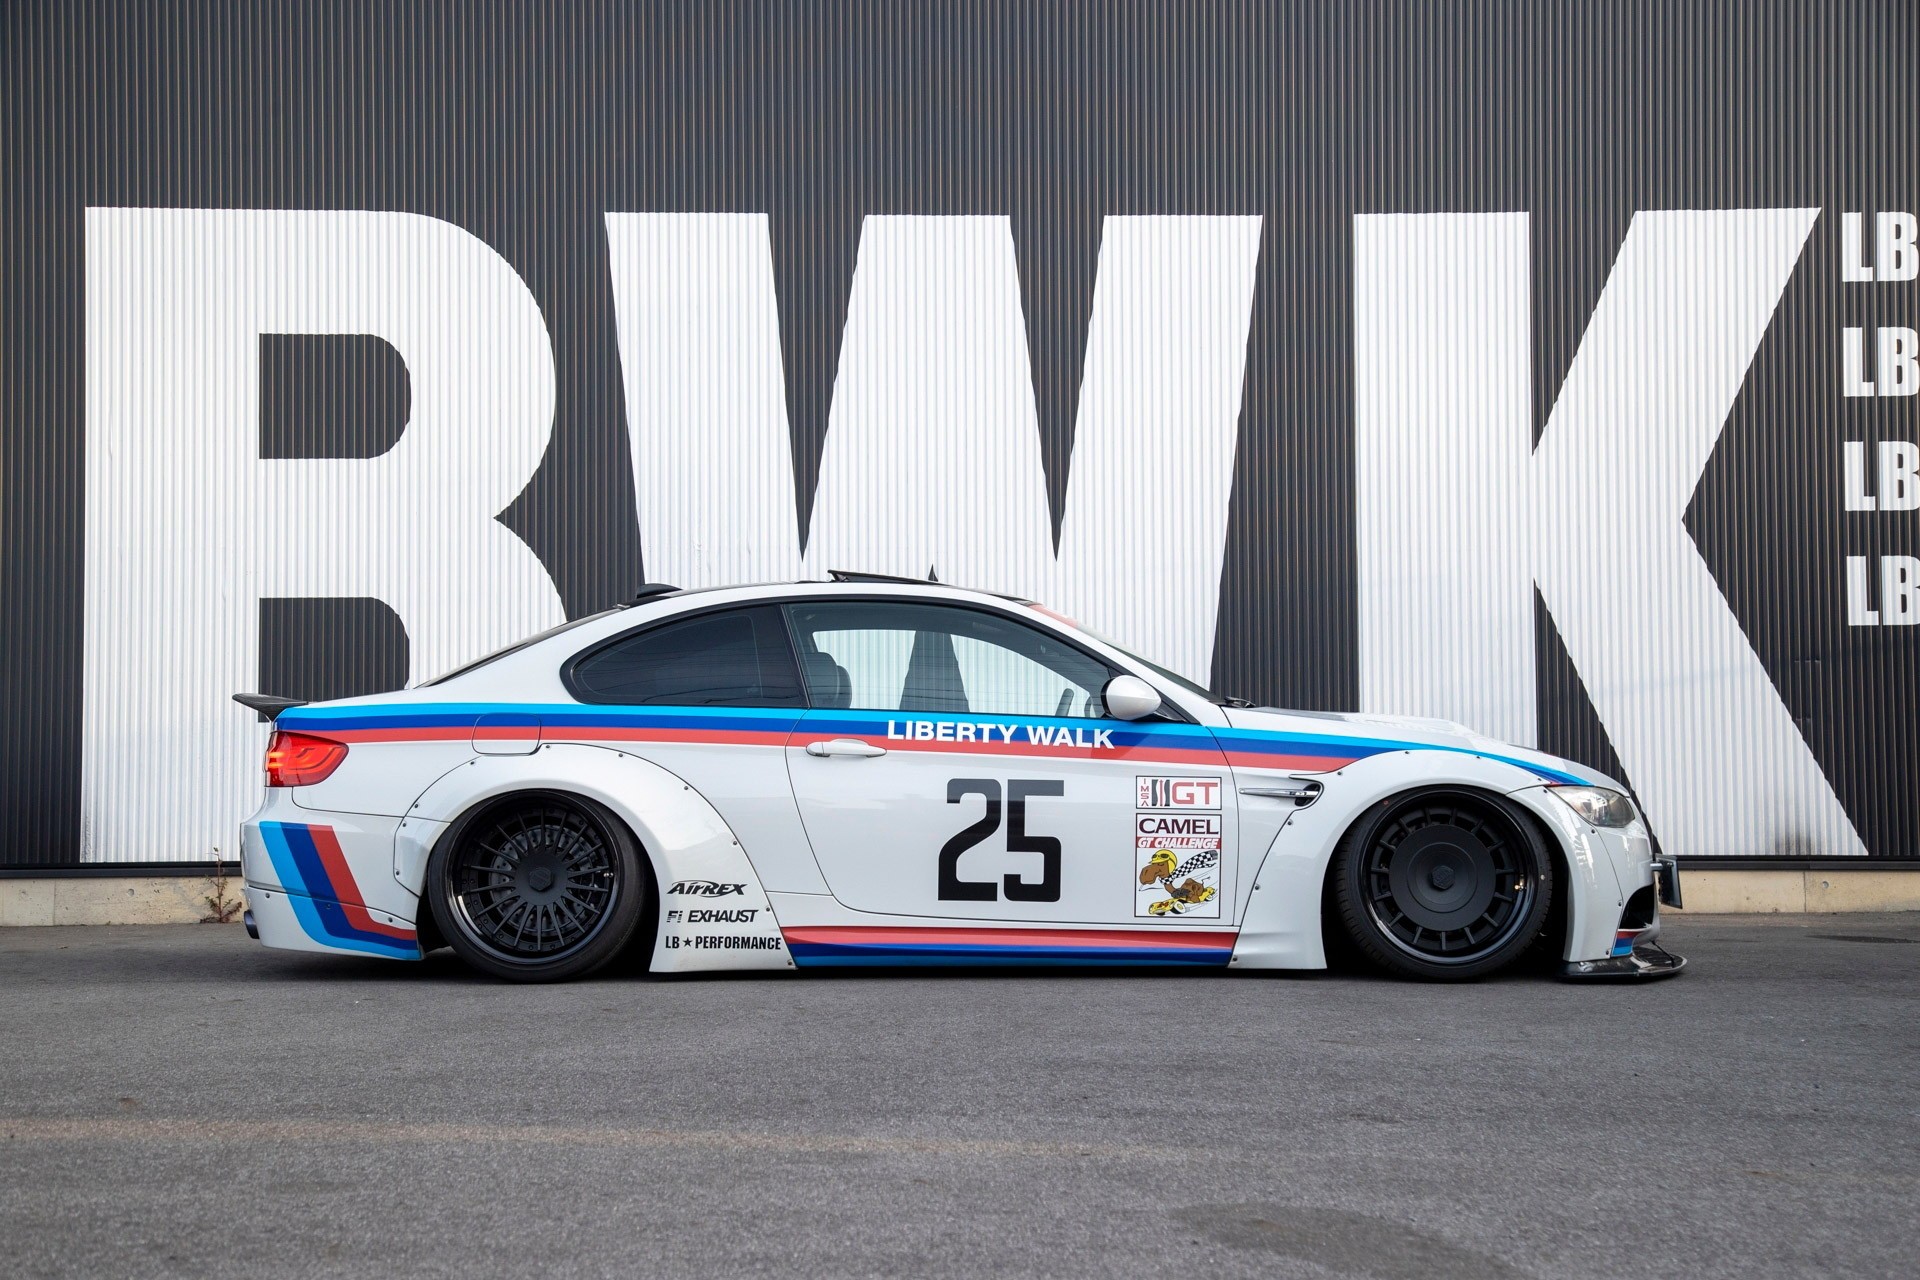 E92 BMW M3 Wants To Be a Racer, Tuner Gaslights It and Lists It